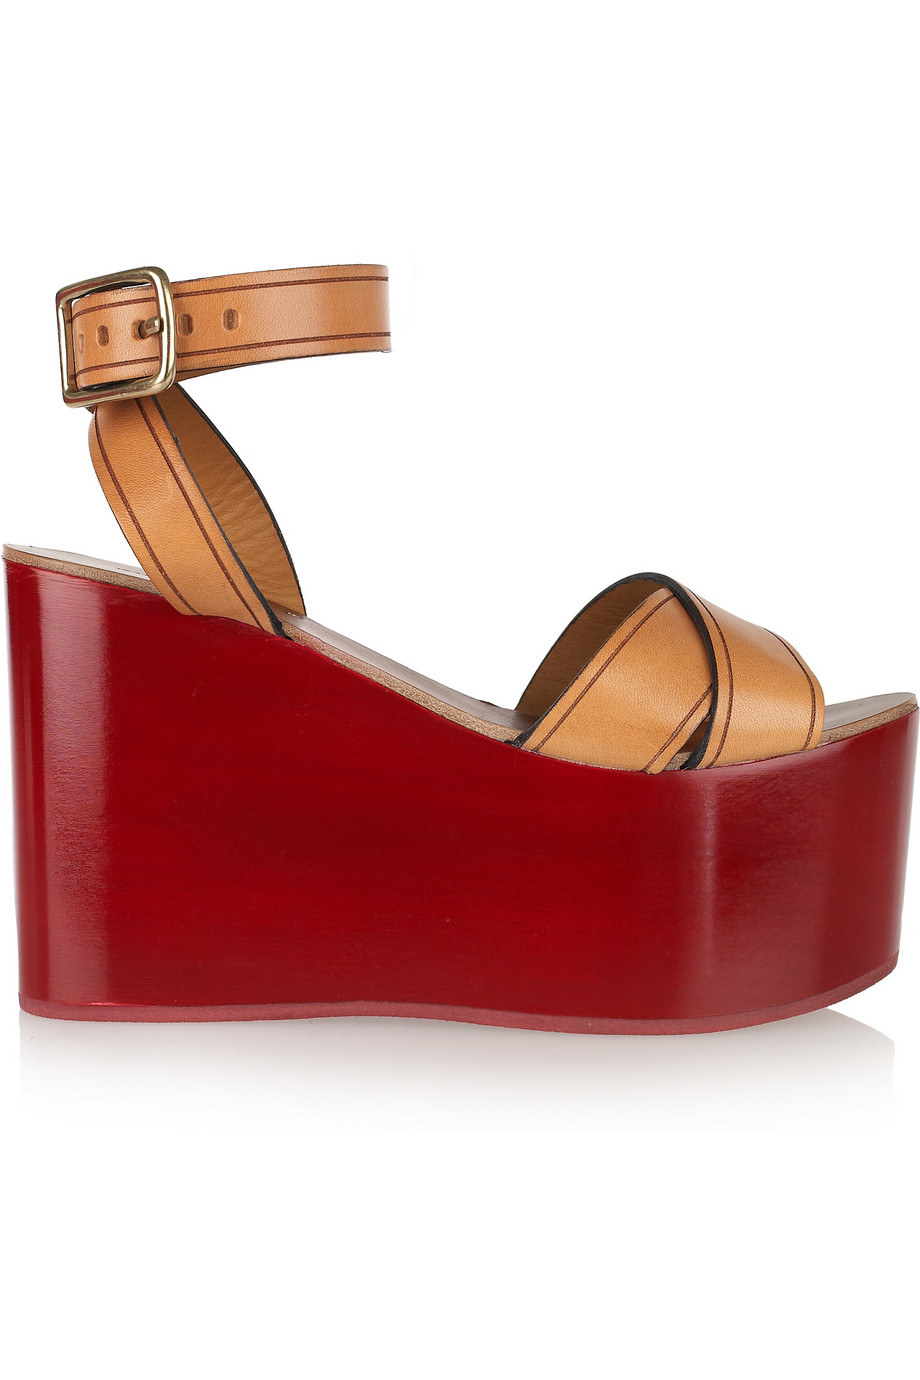 Lyst - Isabel Marant Zora Leather Lacquered-wedge Sandals in Red